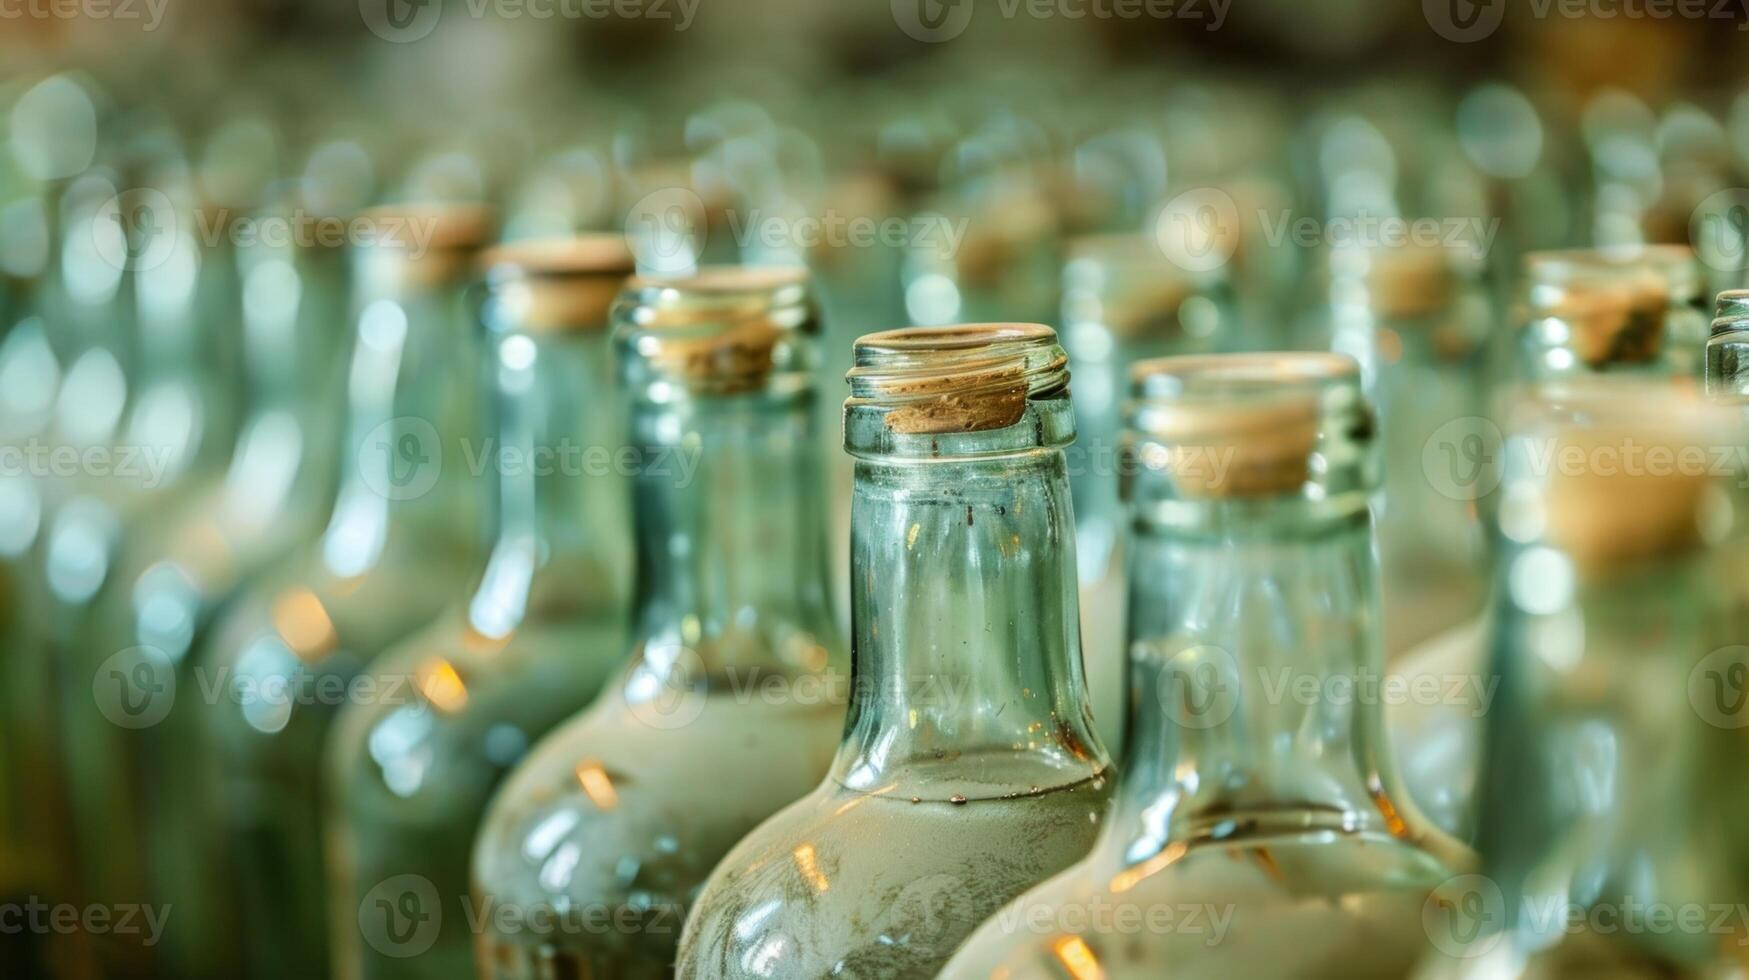 Carefully crafted glass bottles neatly lined up and ready to be filled with the finished tropical fruit wines photo